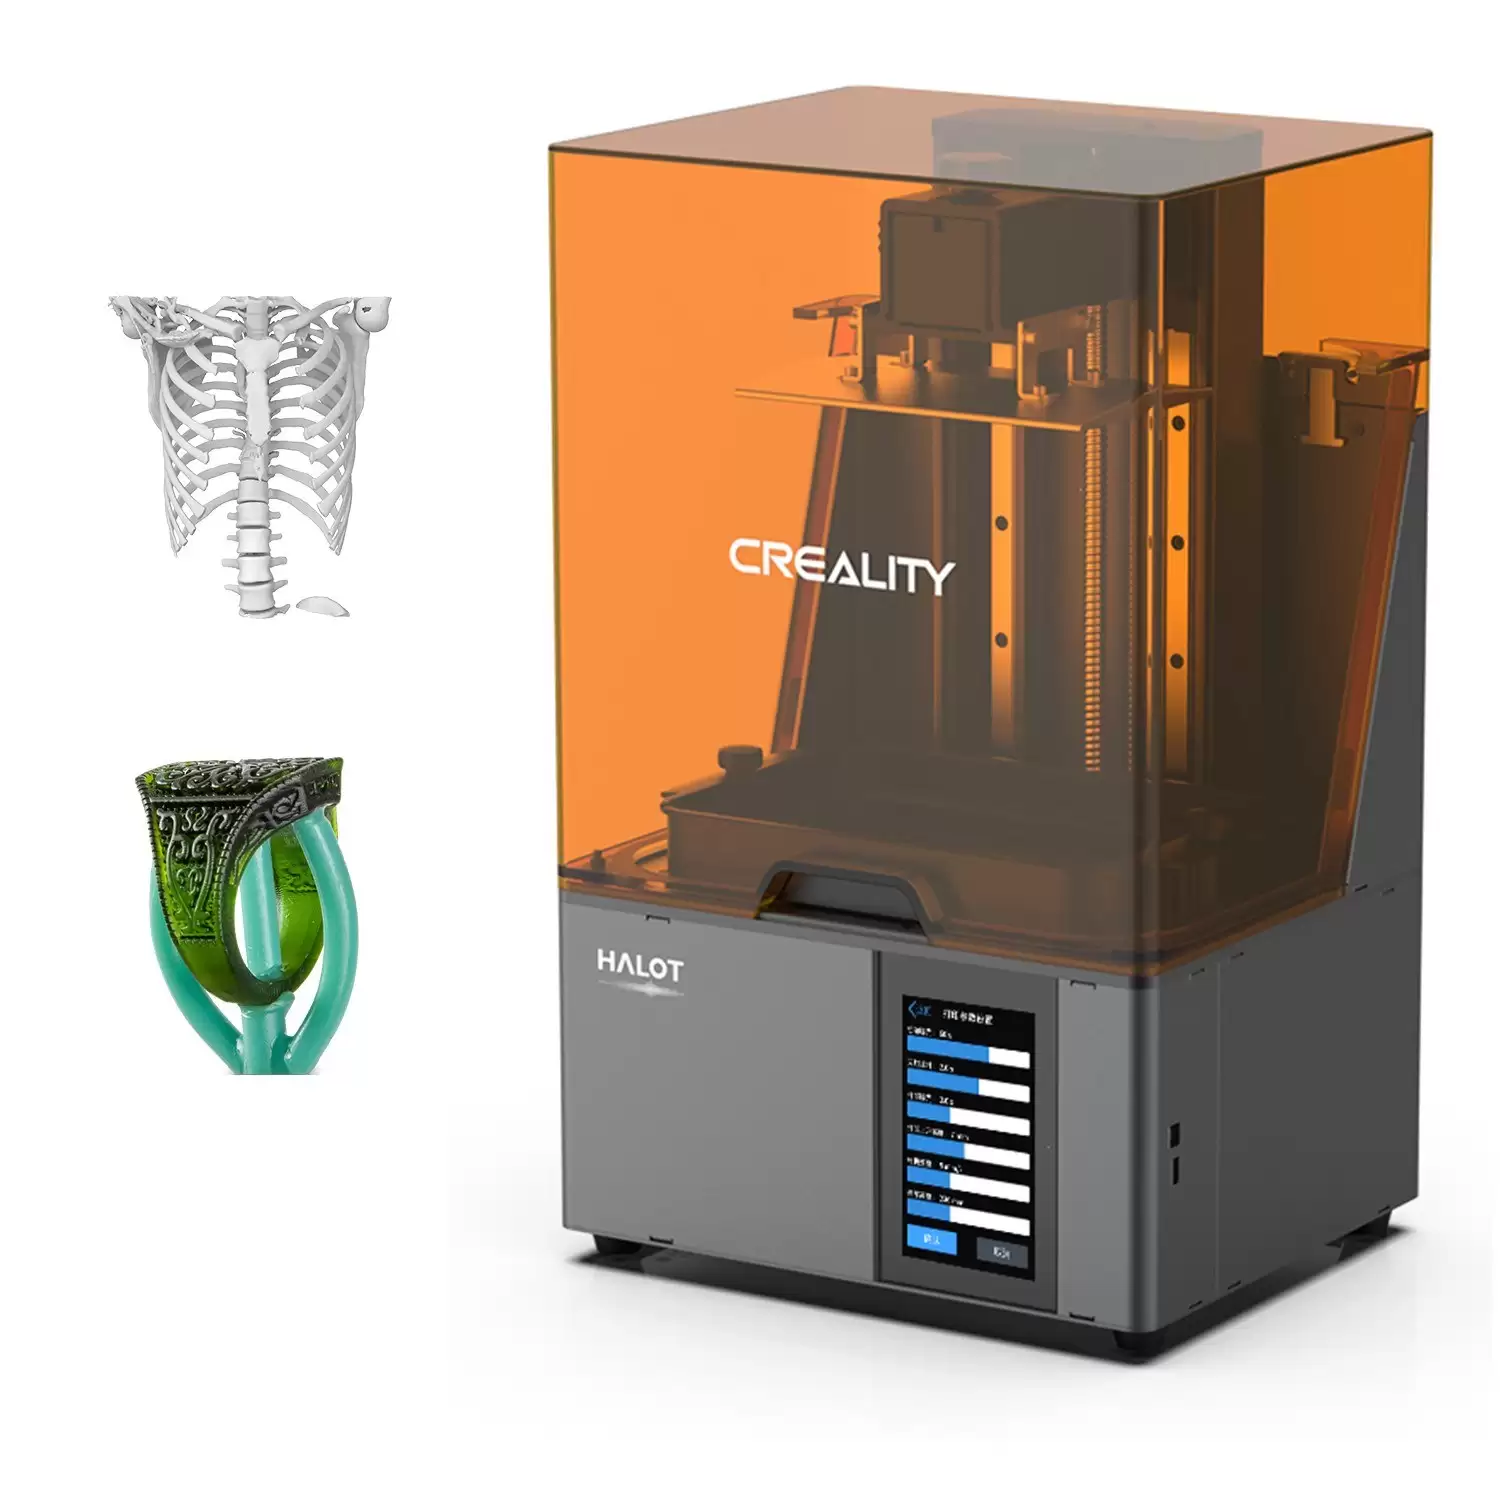 Get Extra $210 Discount On Creality Halot-Sky 3d Printer Uv Photocuring Lcd Resin 3d Printer, $670 (Inclusive Of Vat) At Tomtop